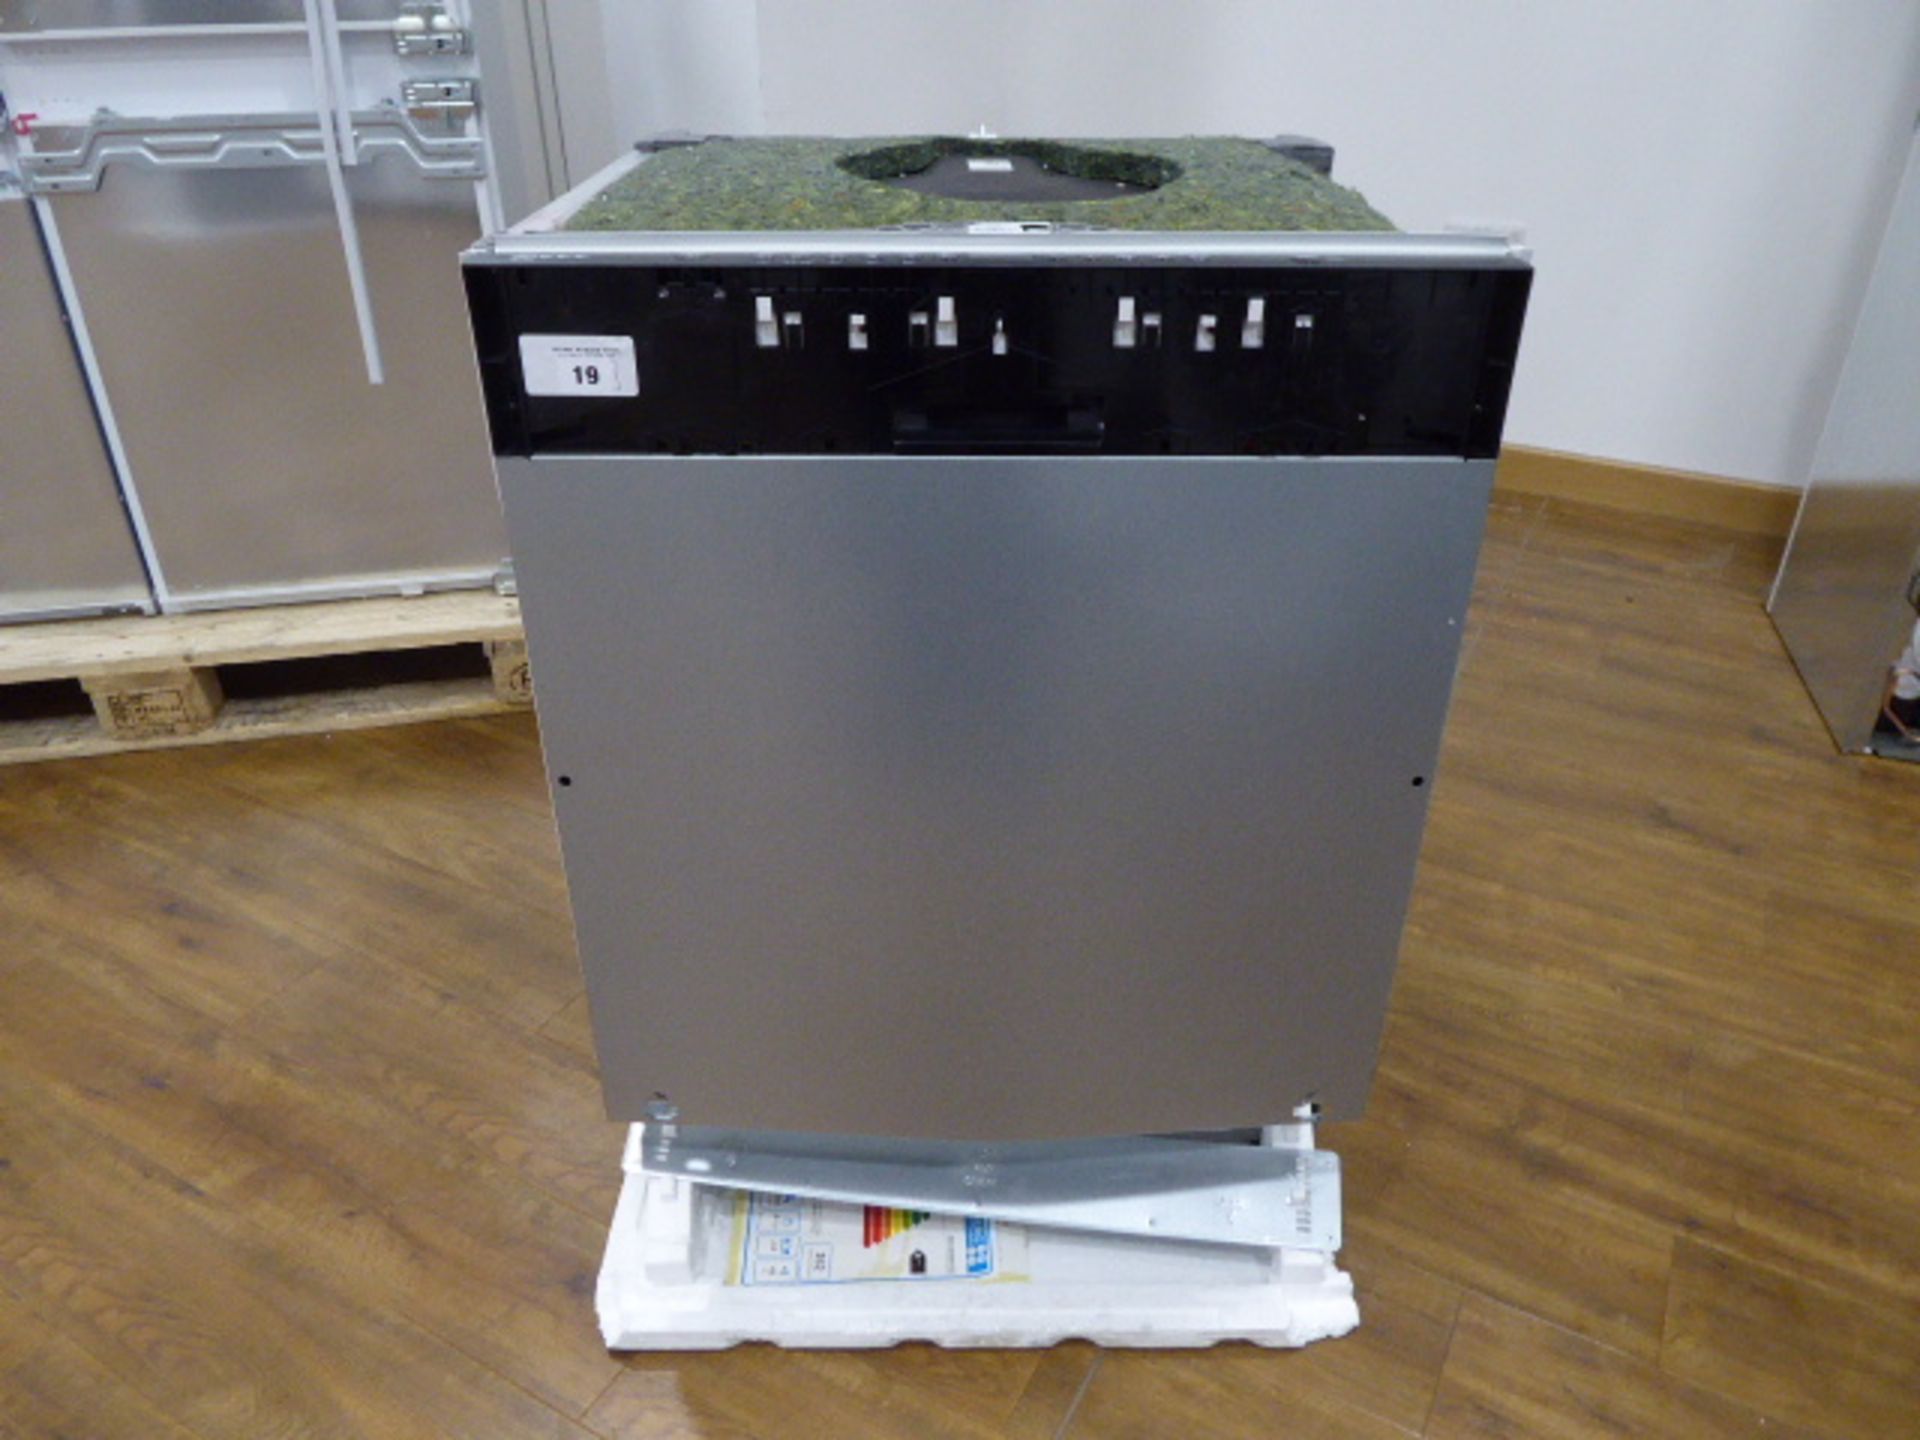 S513K60X1GB Neff Dishwasher fully integrated 60 cm Slightly bent front plate. All parts included